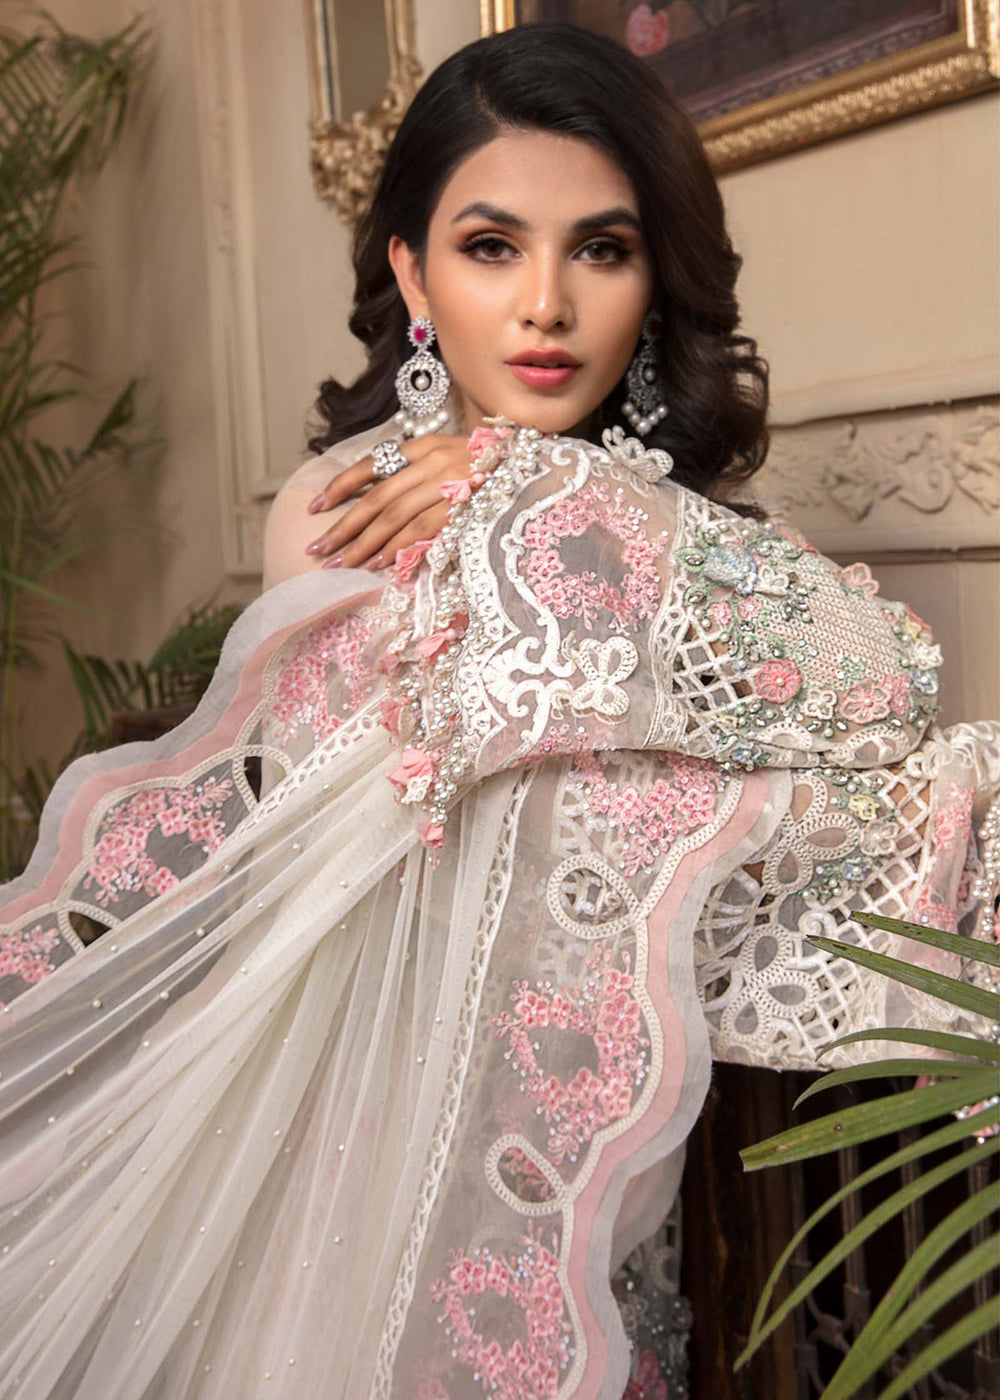 Buy Now Off White Embroidered Suit - Maria B - Mbroidered Heritage Edition - BD-2604 Online in USA, UK, Canada & Worldwide at Empress Clothing. 